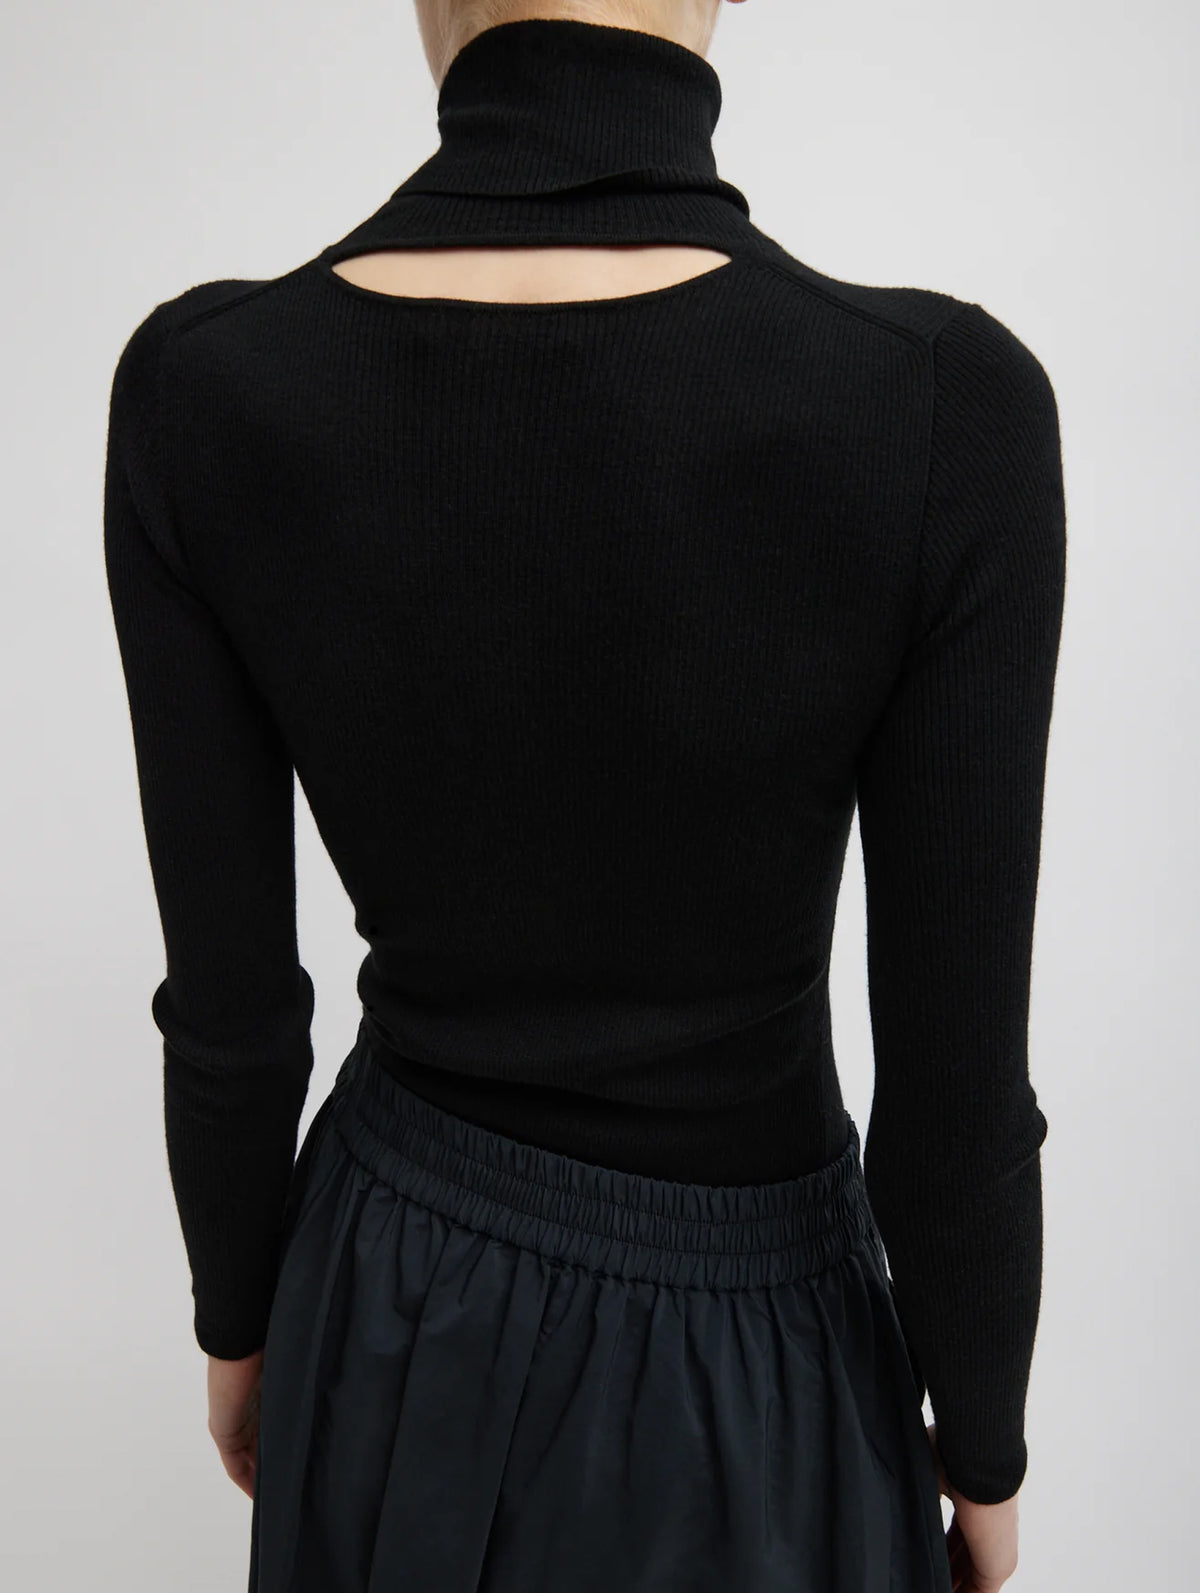 Feather Weight Ribbed Turtleneck Sweater in Black